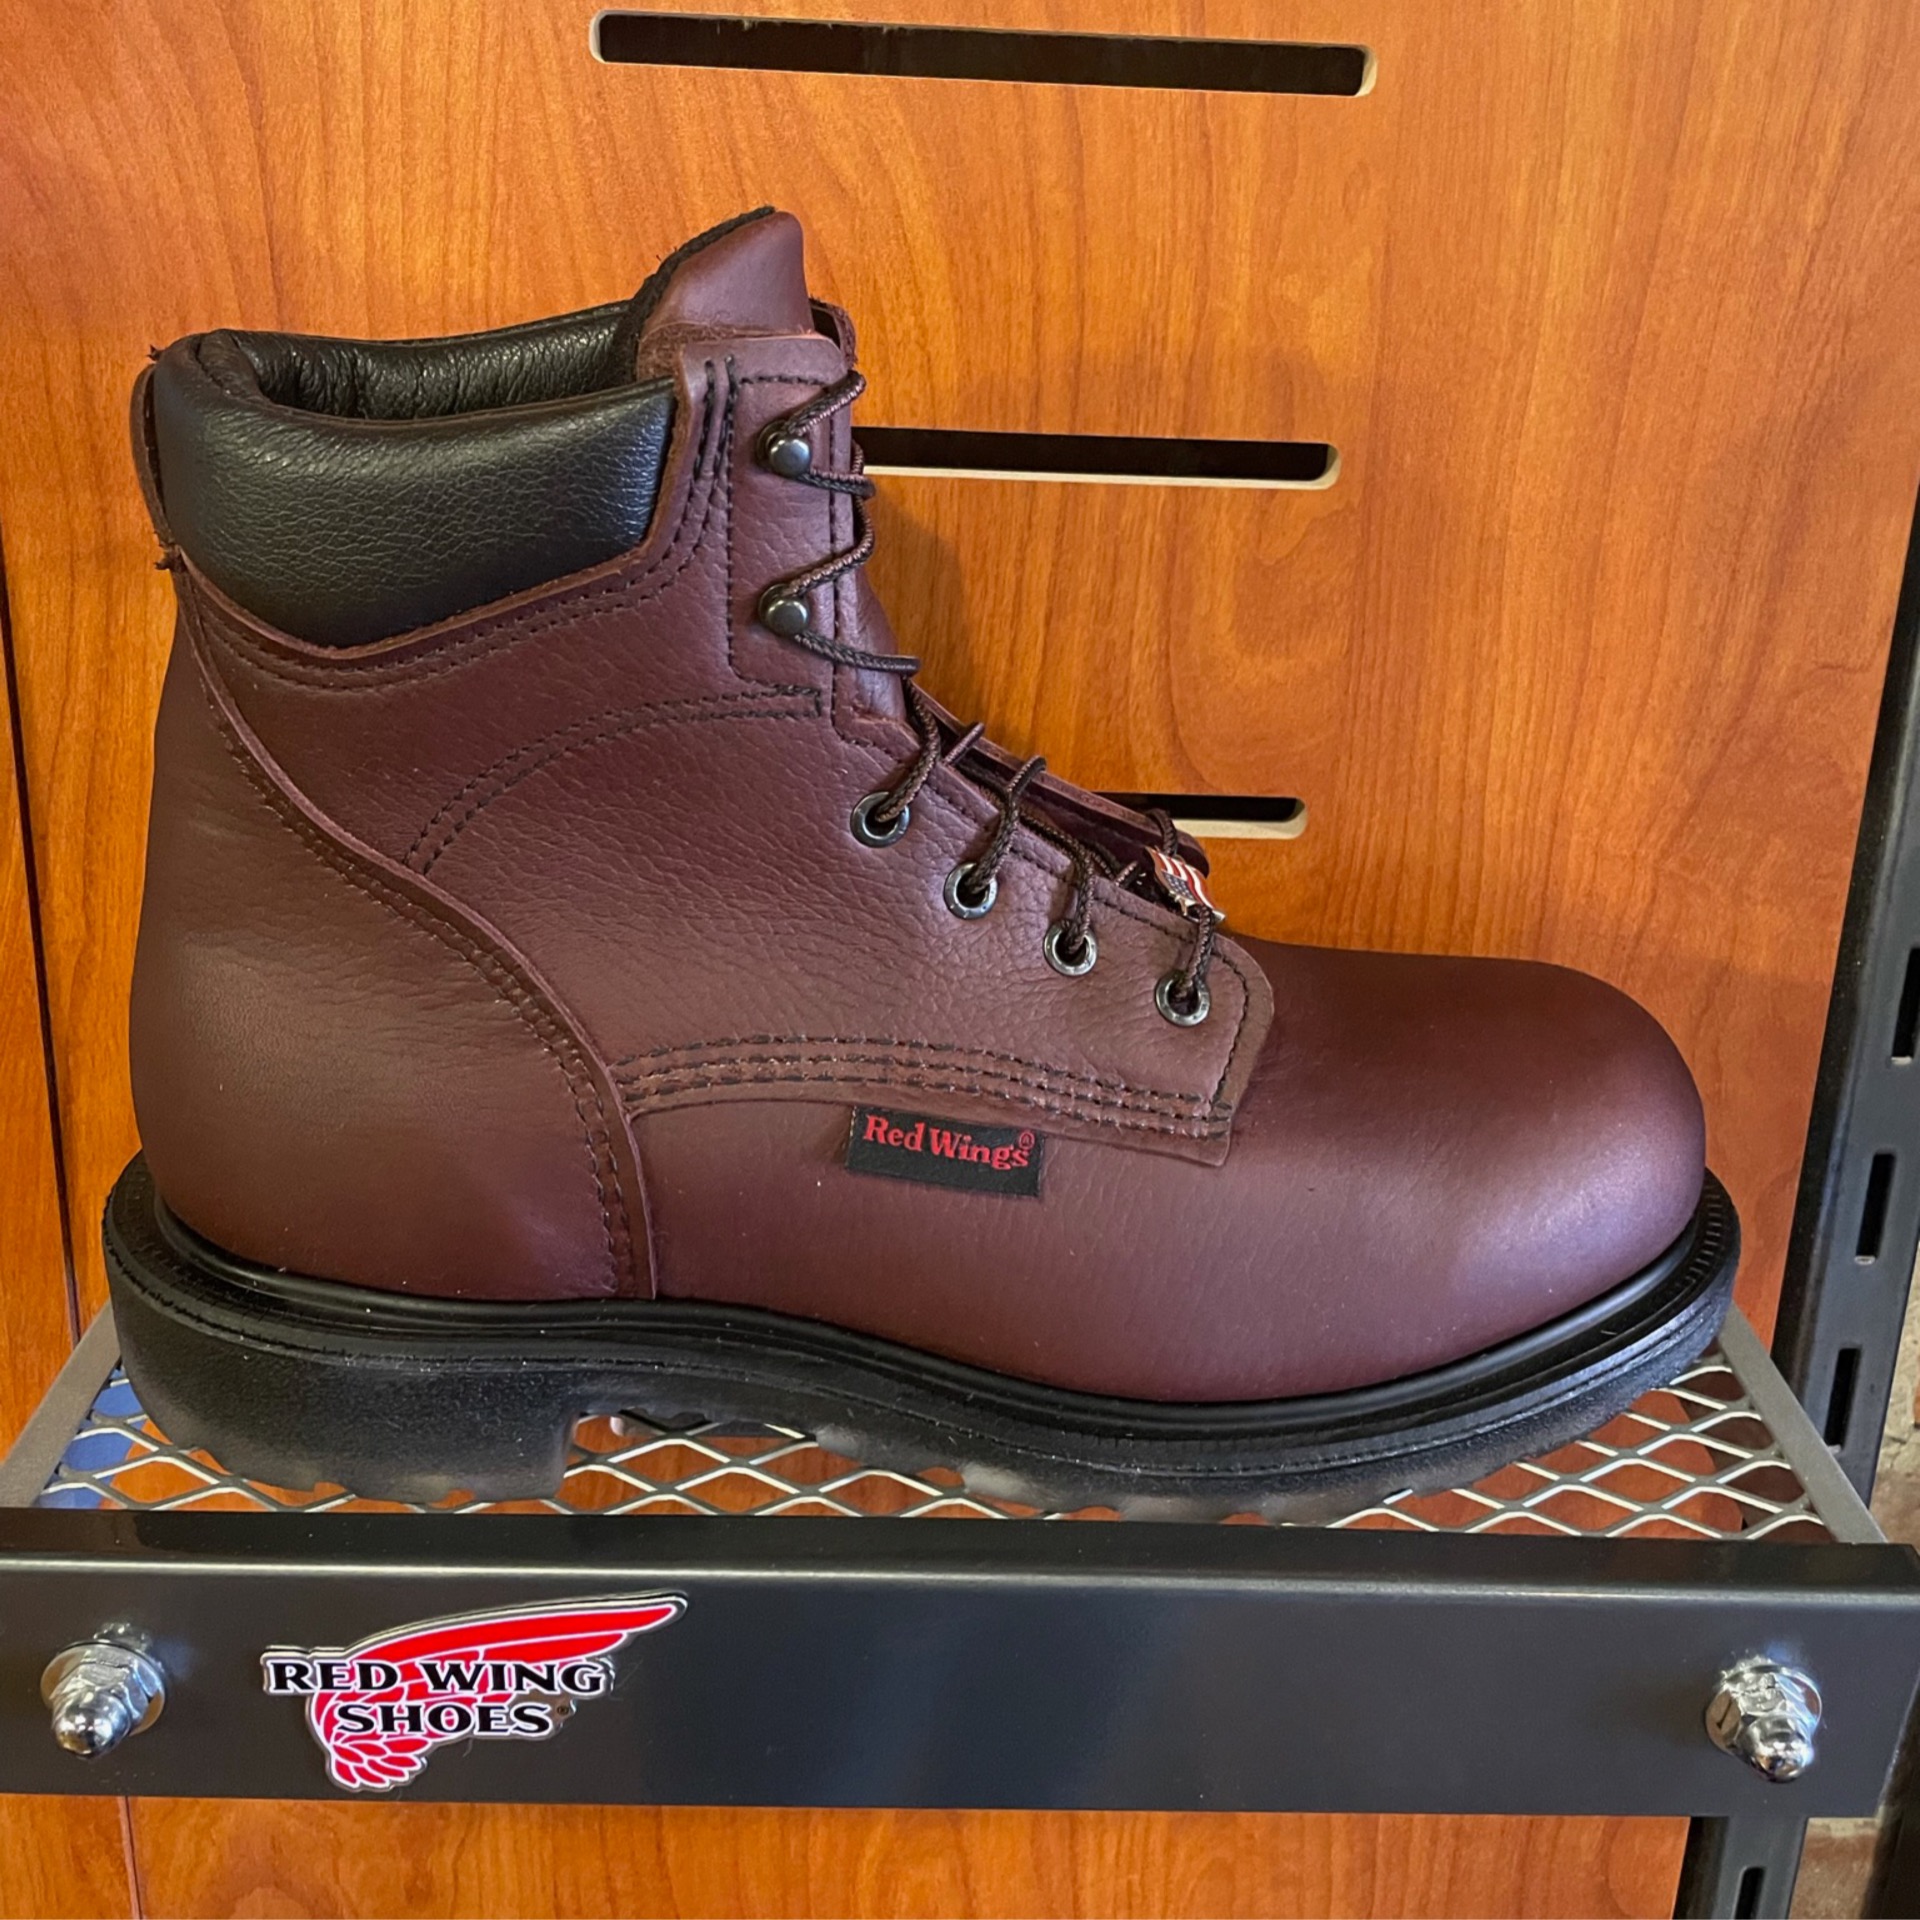 Red Wing 2406 – Linns Shoes